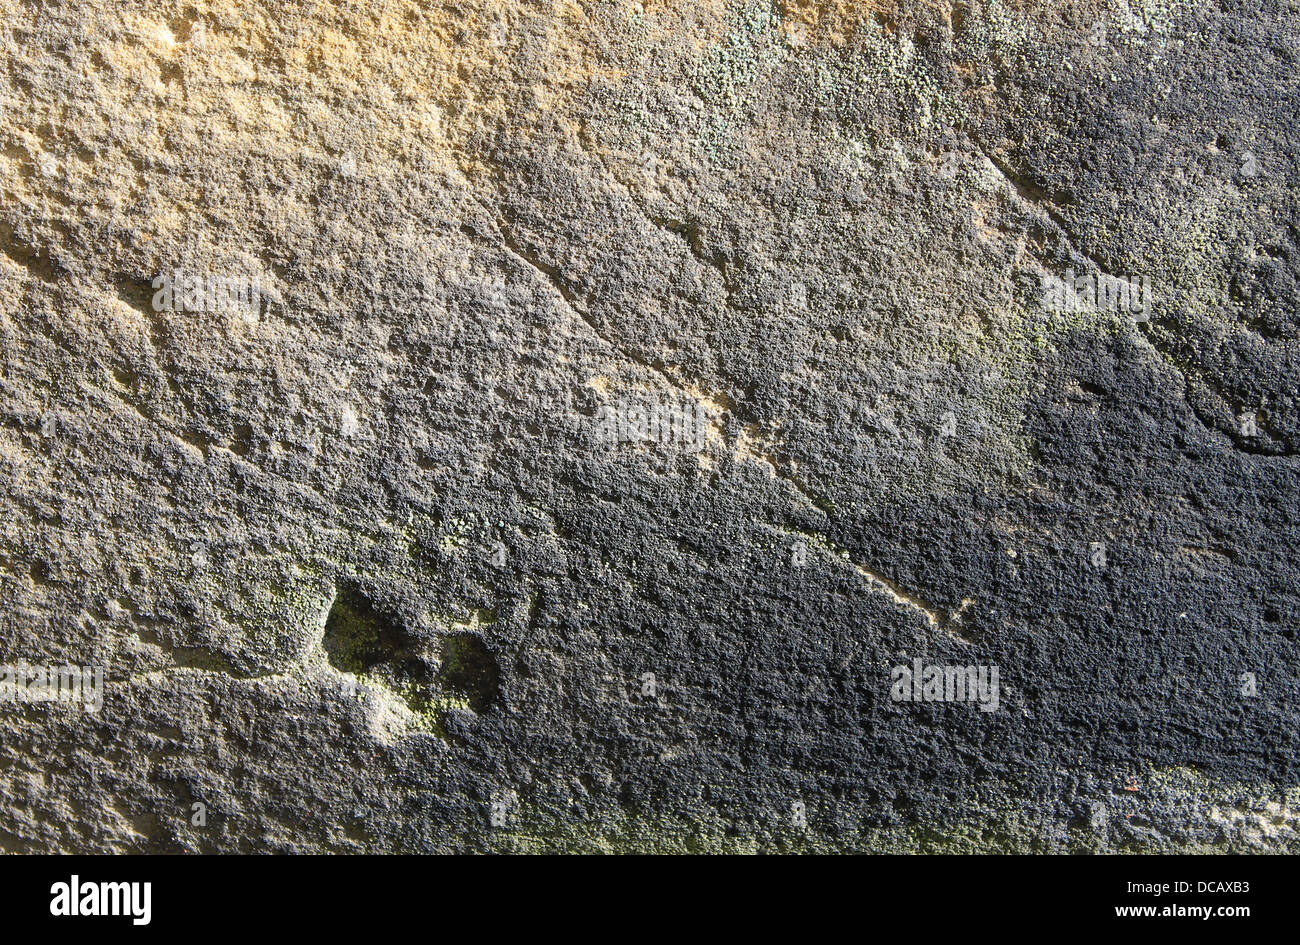 Abstract background of textured stone or rock Stock Photo